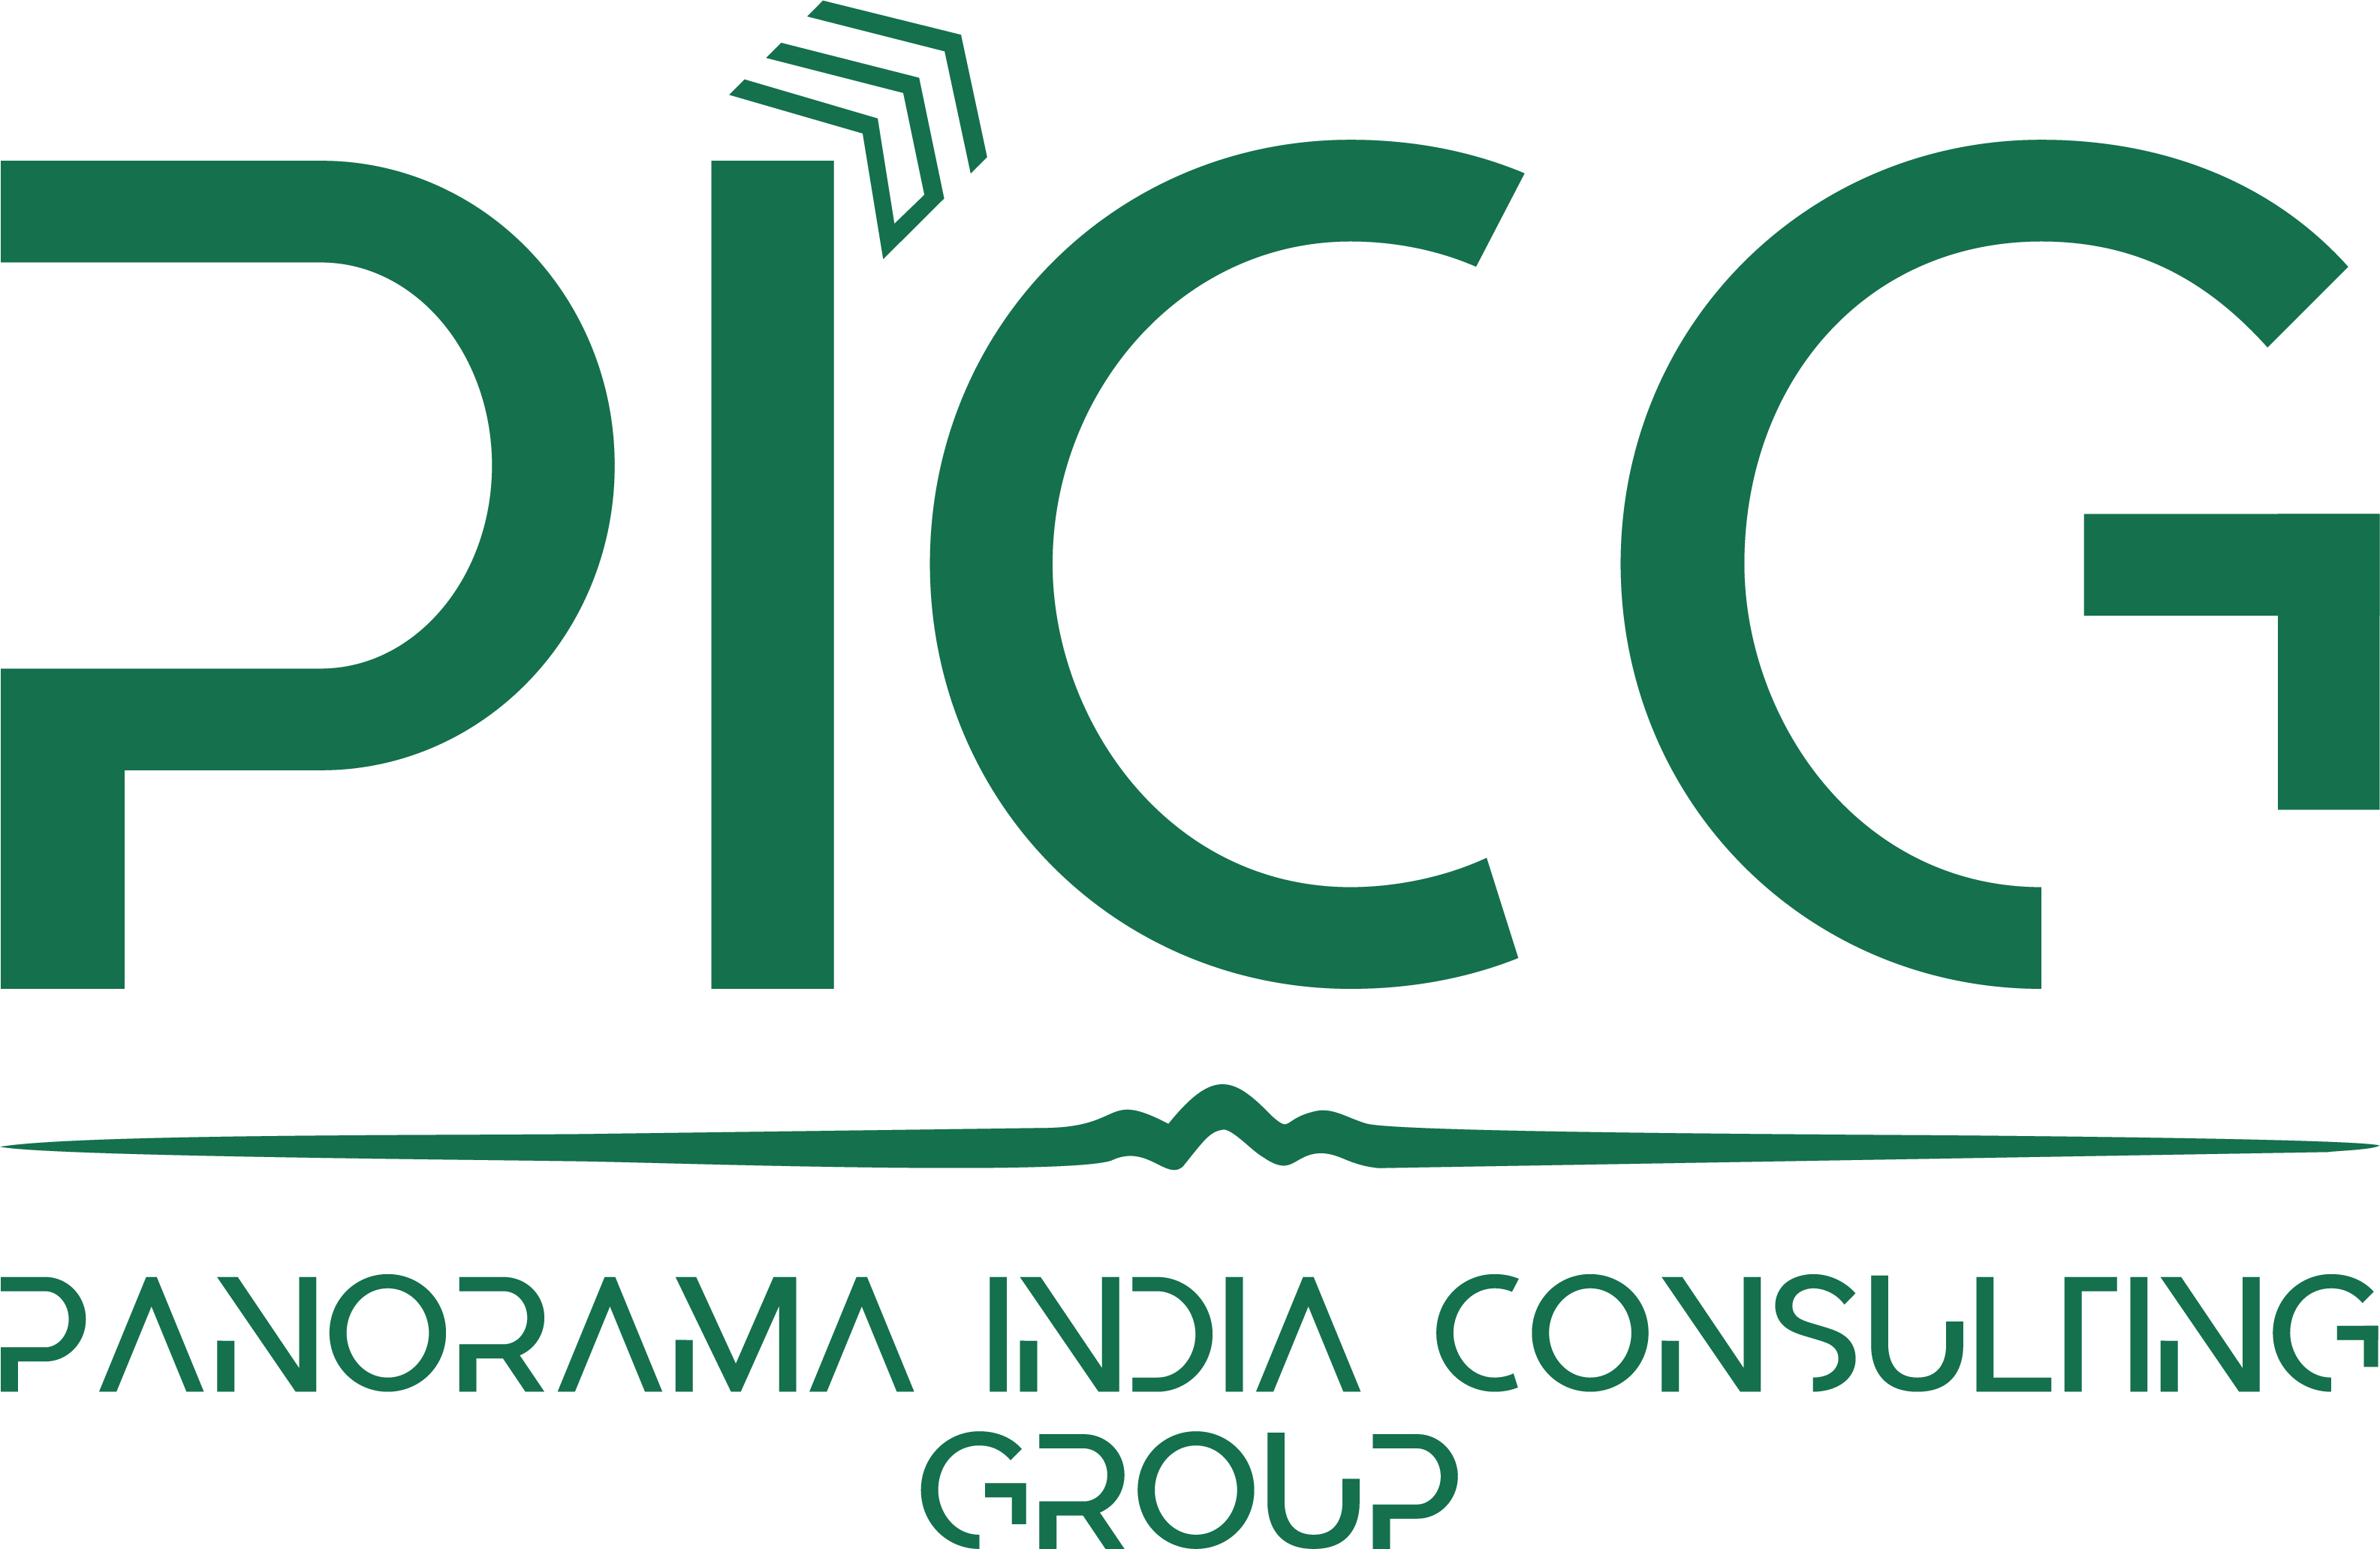 Panorama India Consulting Group